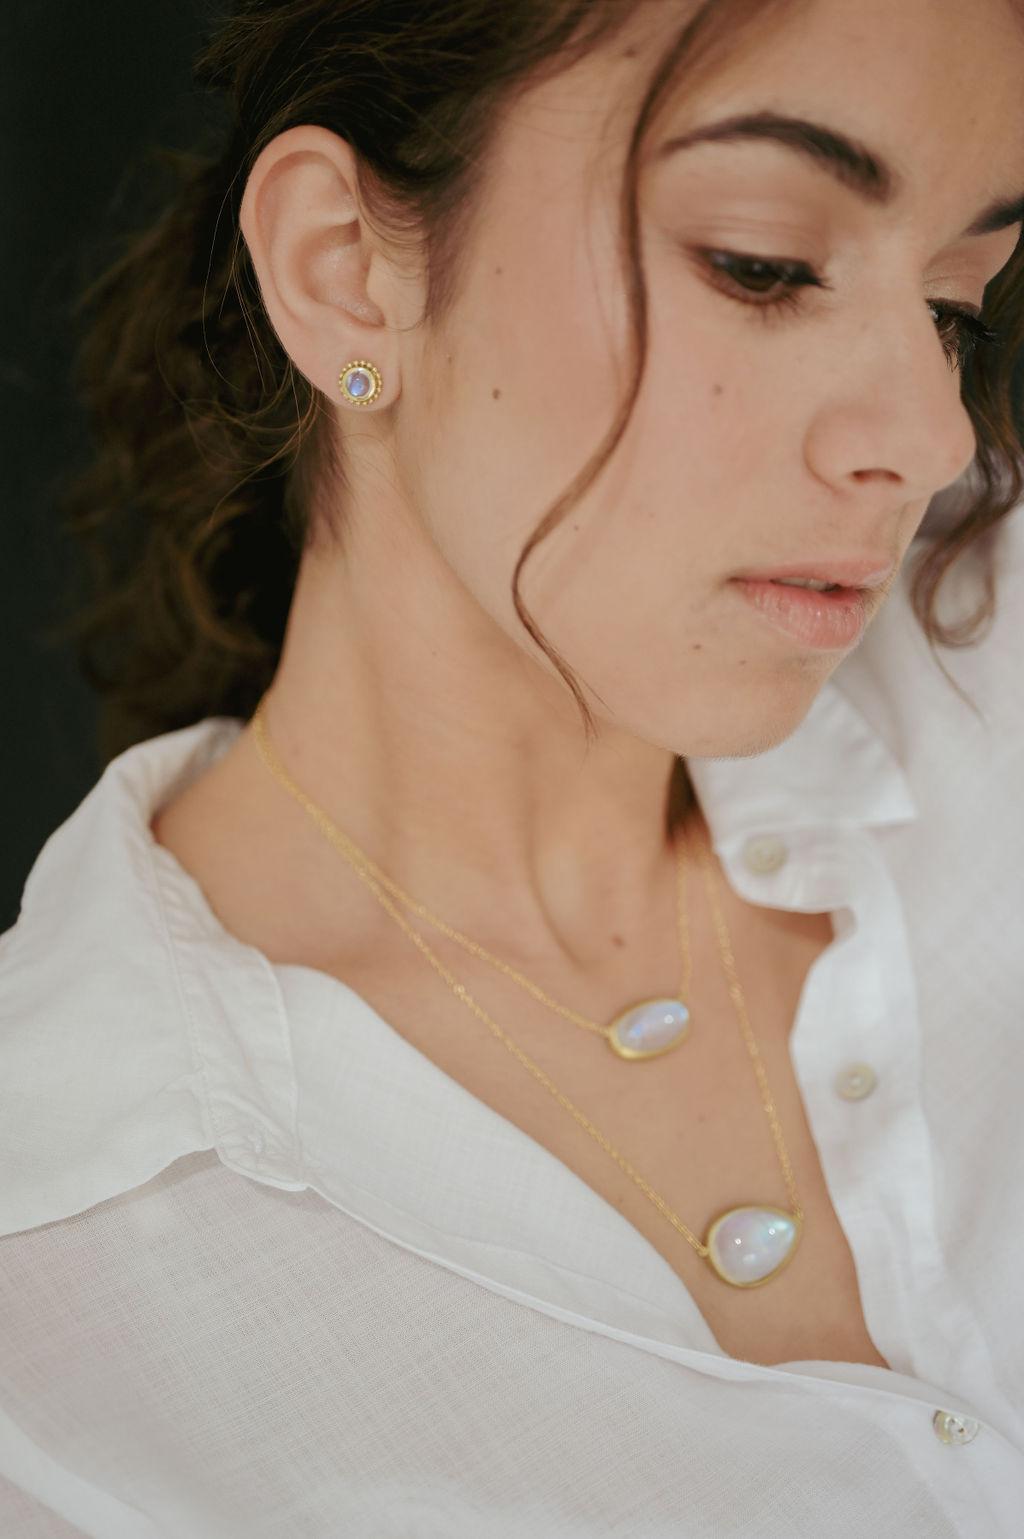 Handcrafted in 18k green gold, Faye Kim’s modern design conveys understated elegance and a truly stylish, everyday look! With their blue flash and adularescence, moonstones have become a mainstay in today's jewelry wardrobe.

Diameter: 10mm
All